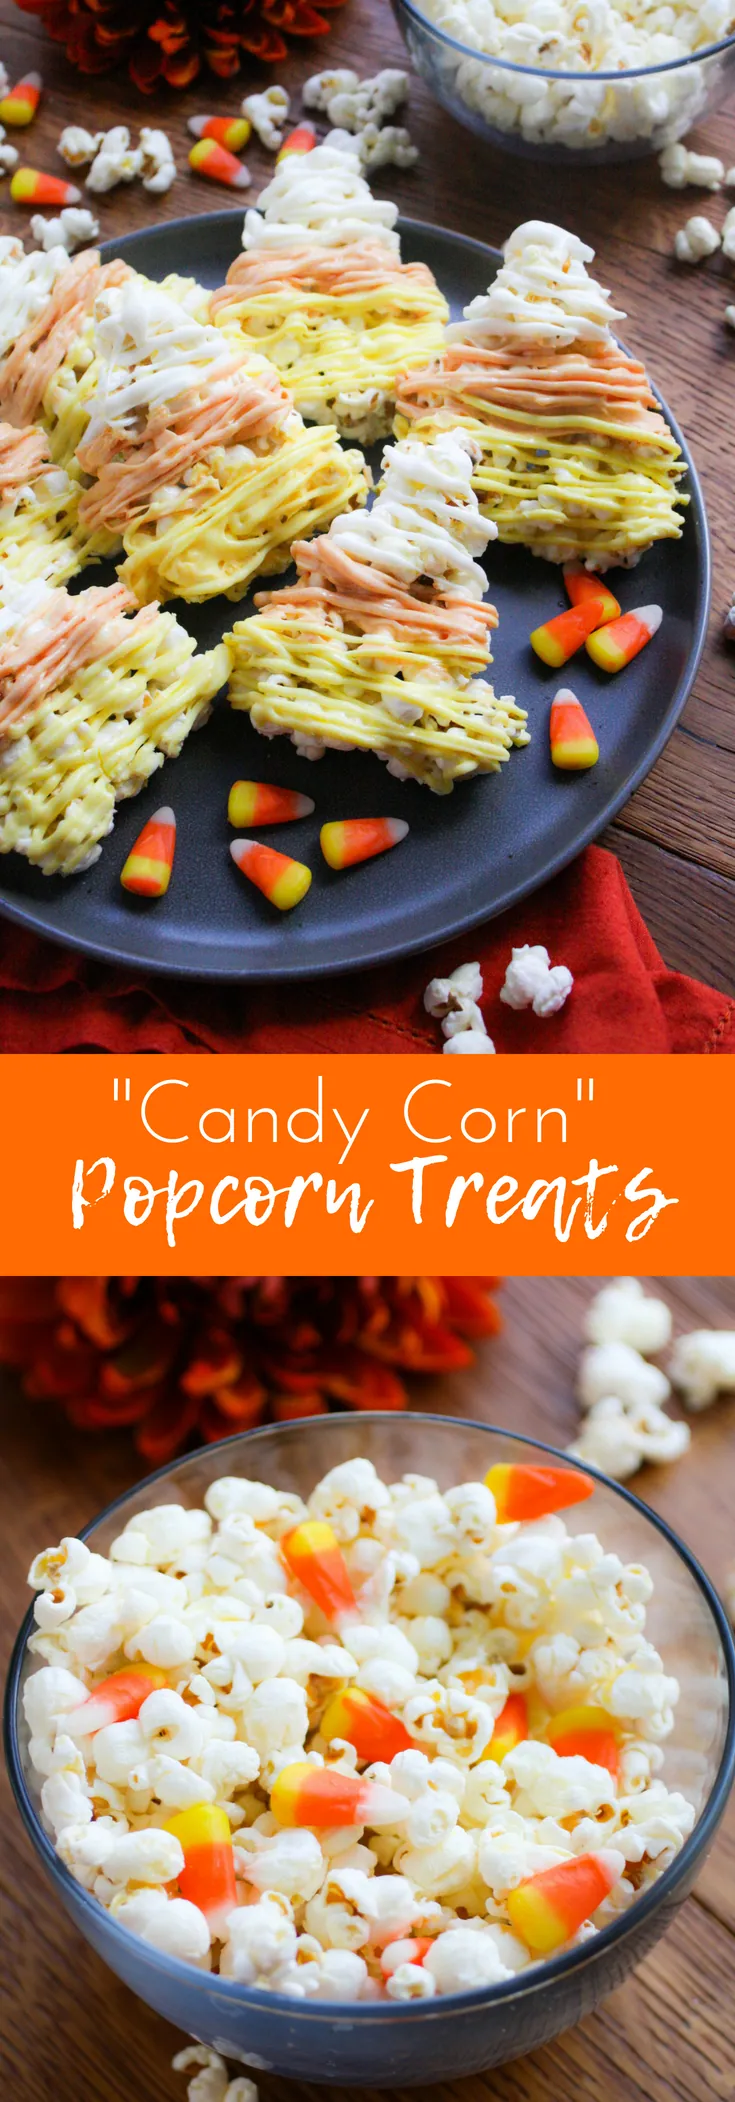 Candy Corn-Shaped Popcorn Balls are a festive Halloween treat you'll love! Serve these Candy Corn-Shaped Popcorn Balls for Halloween fun!